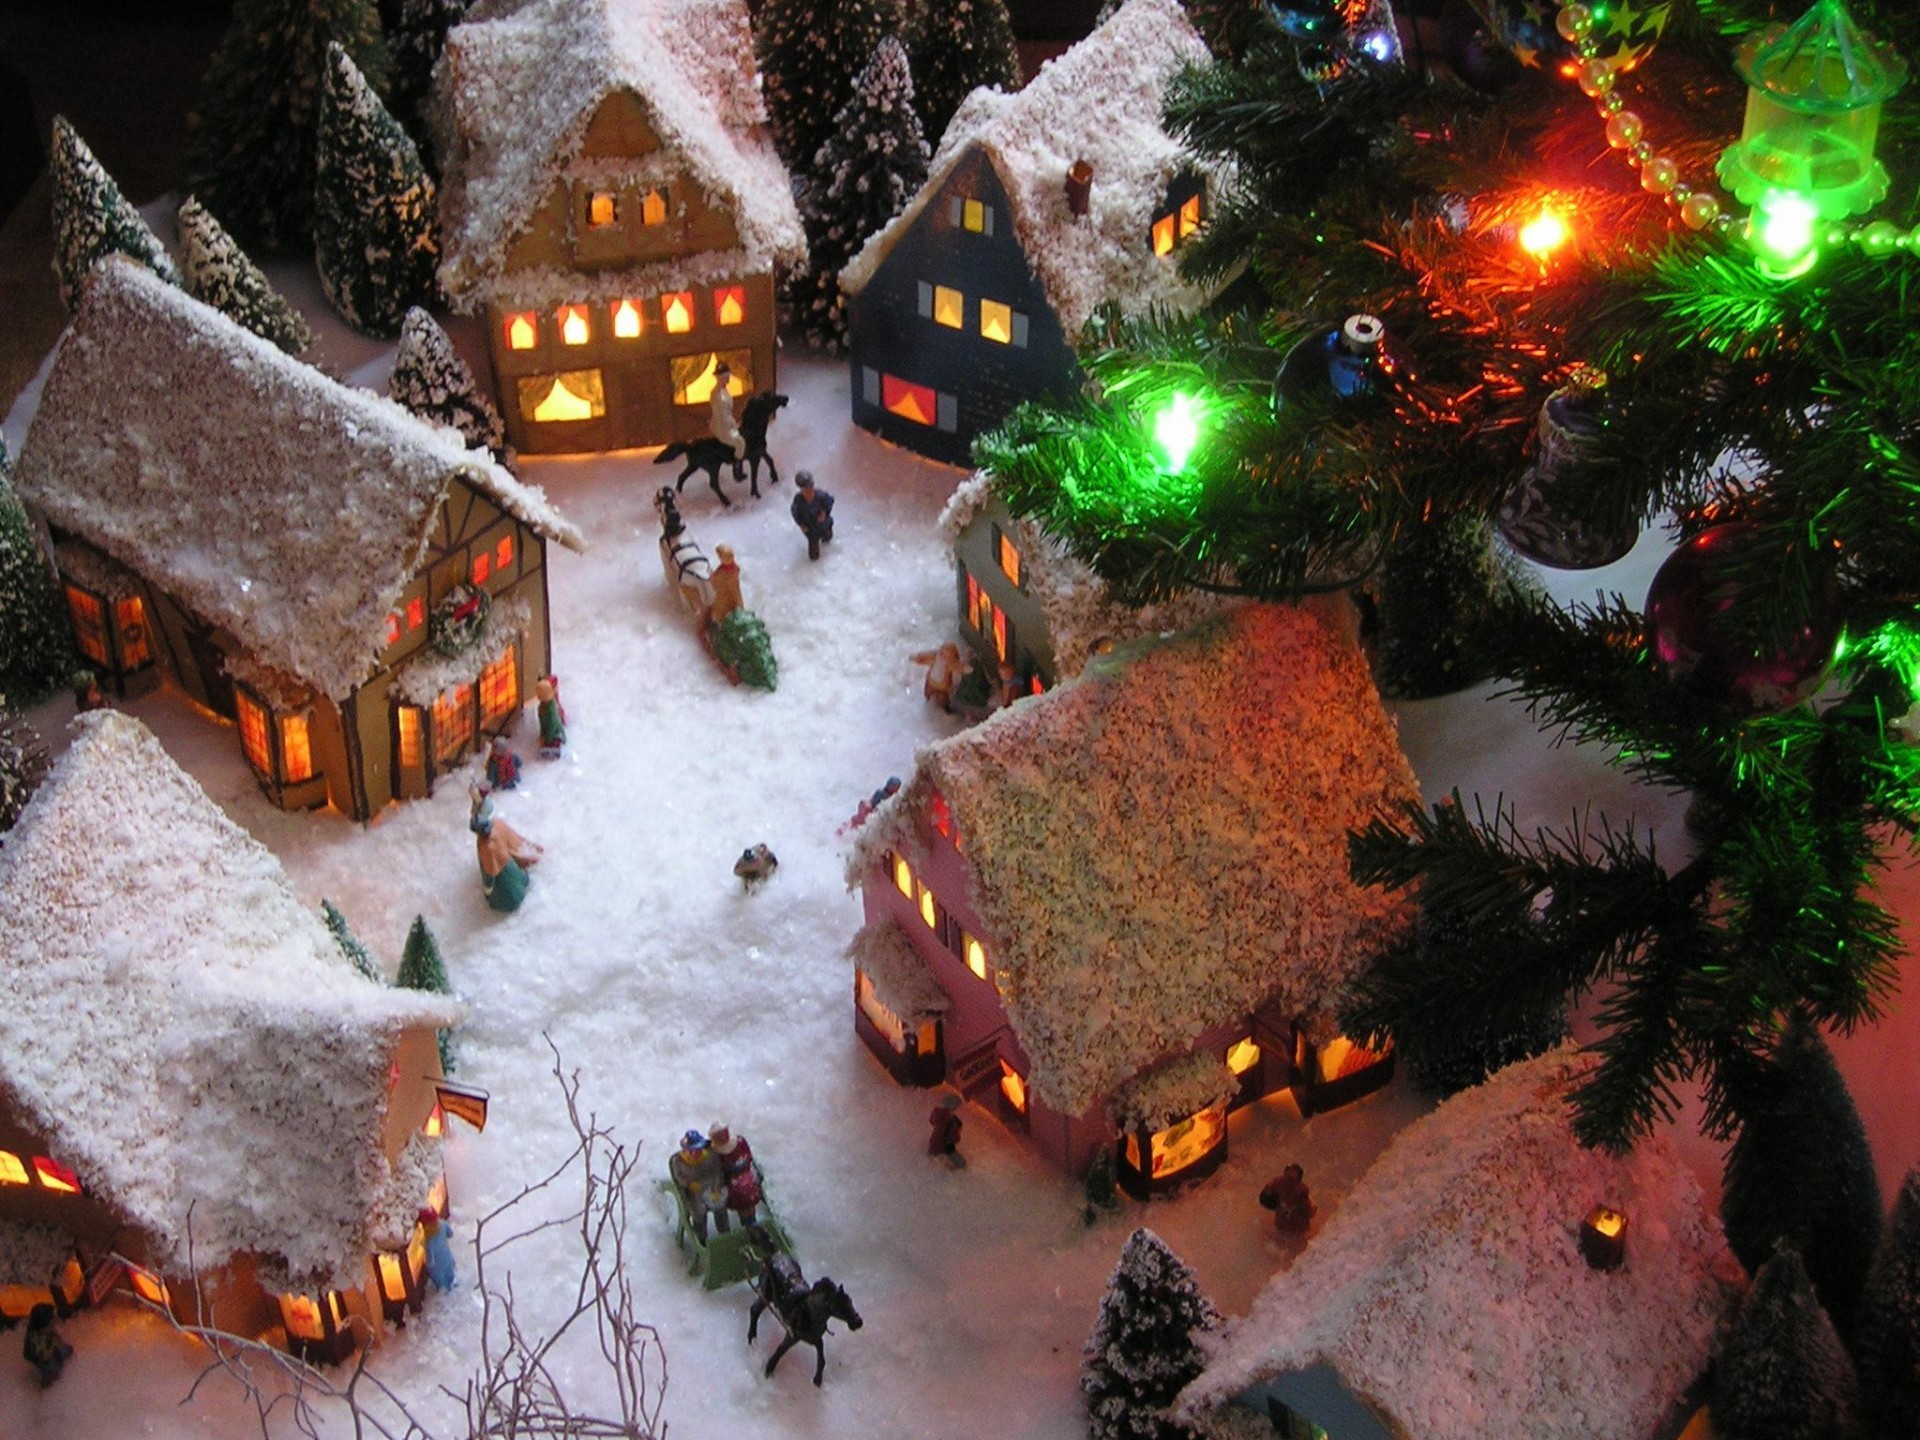 Download Christmas Town Wallpaper by S  c8  Free on ZEDGE now  Browse millions of popular christmas W  Christmas town Christmas  pictures Christmas scenes